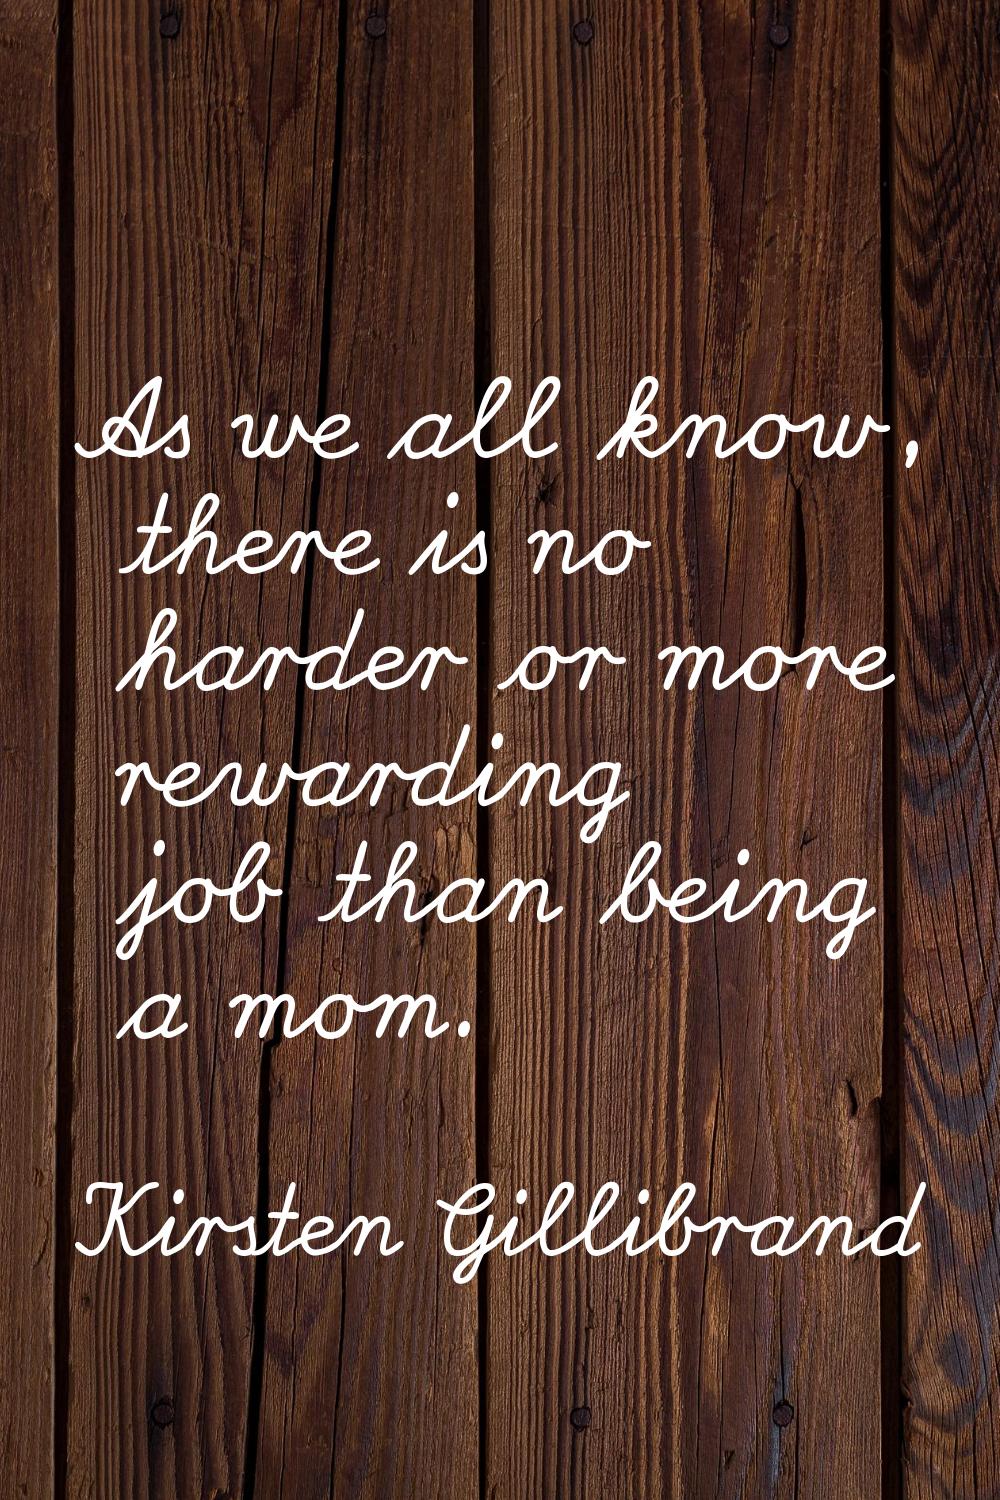 As we all know, there is no harder or more rewarding job than being a mom.